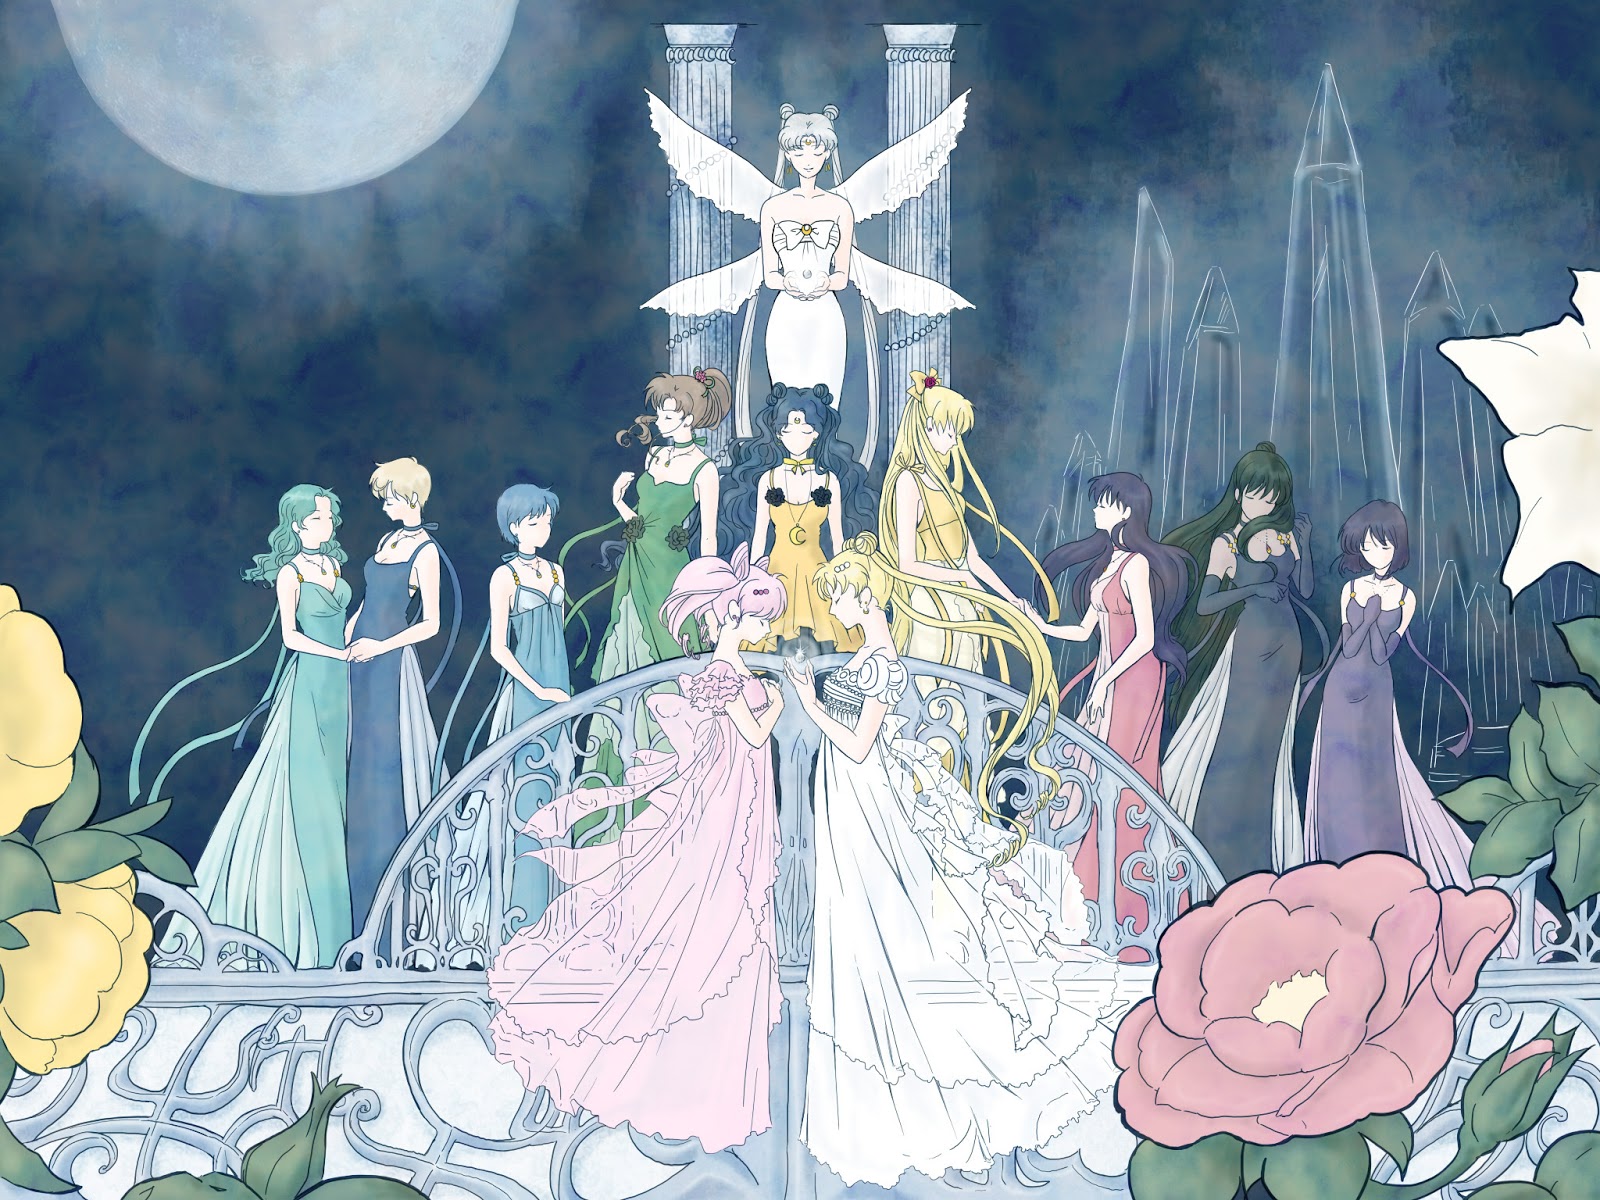 Celebrity Wallpaper and Picture Pokemon Picture: Princess Serenity of the Moon, Nonhumans